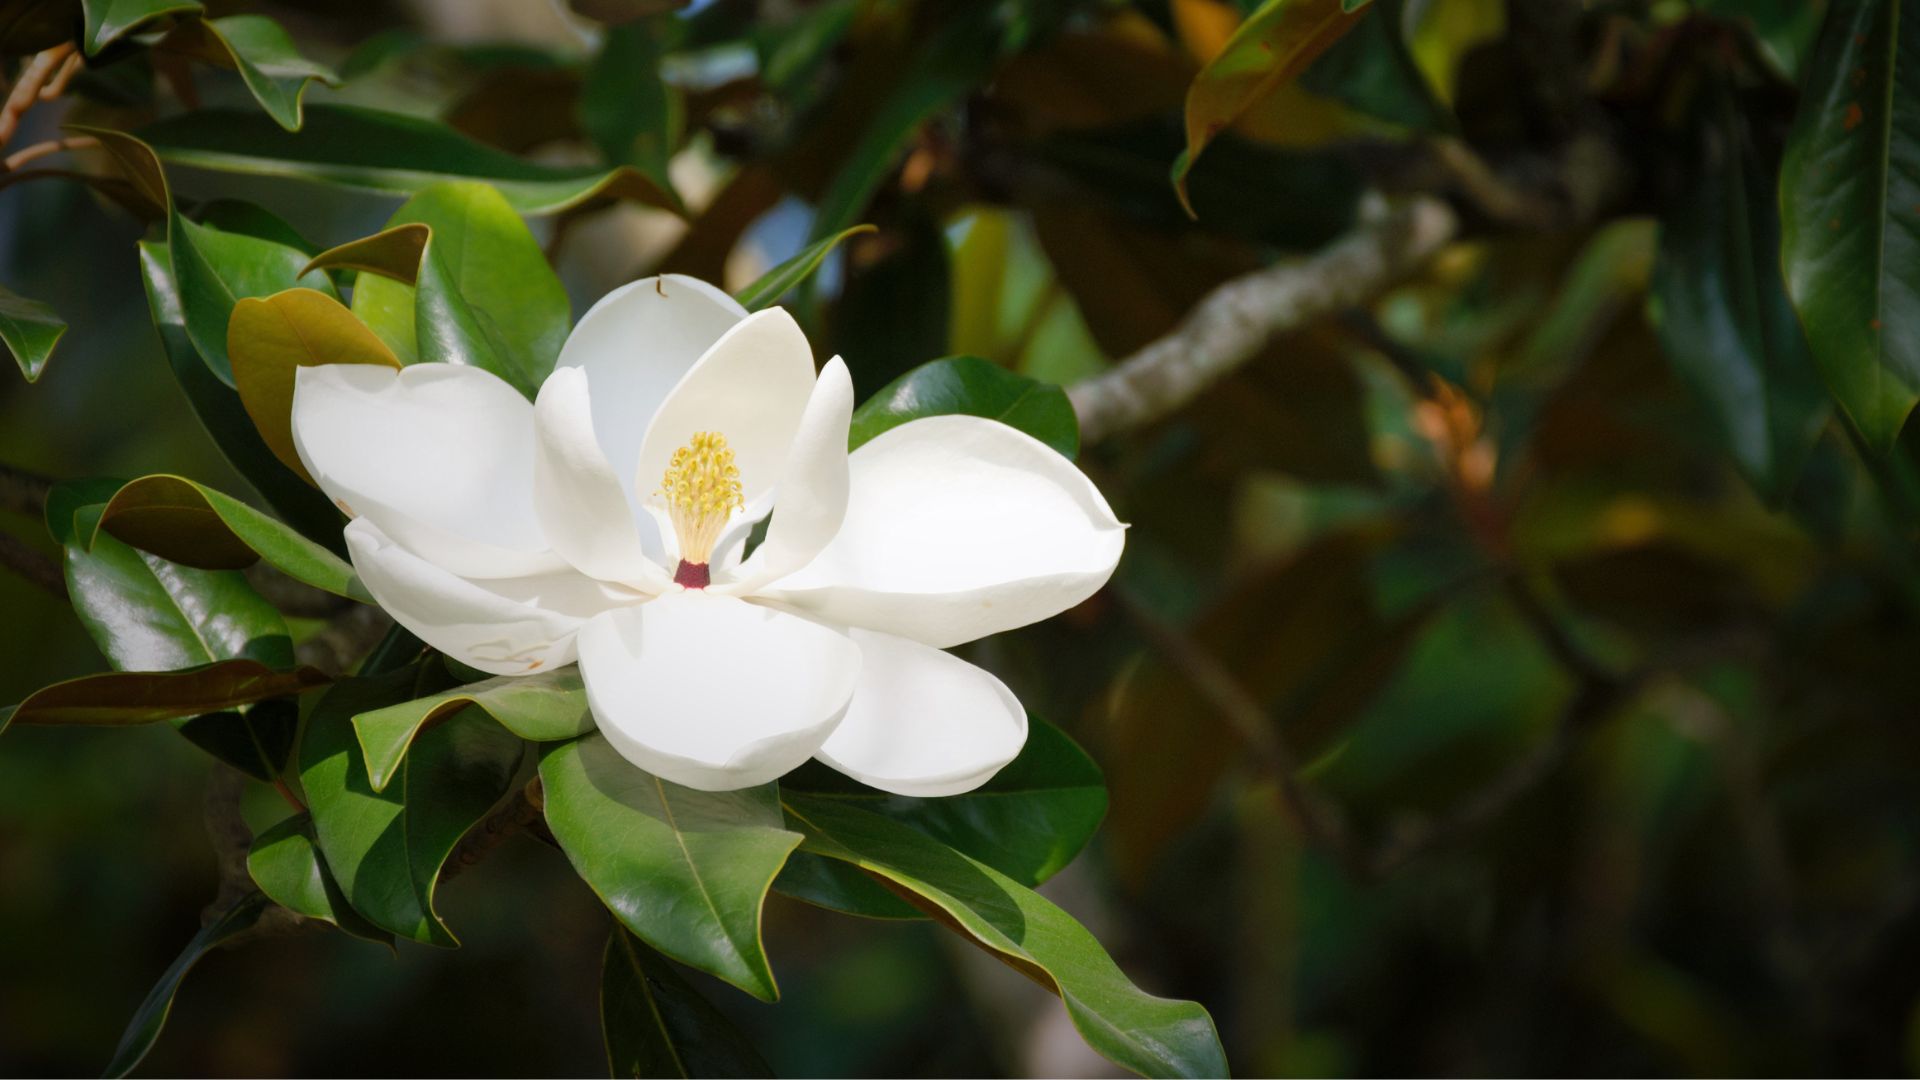 8 Simple Steps Of Growing Magnolia Trees From Seeds